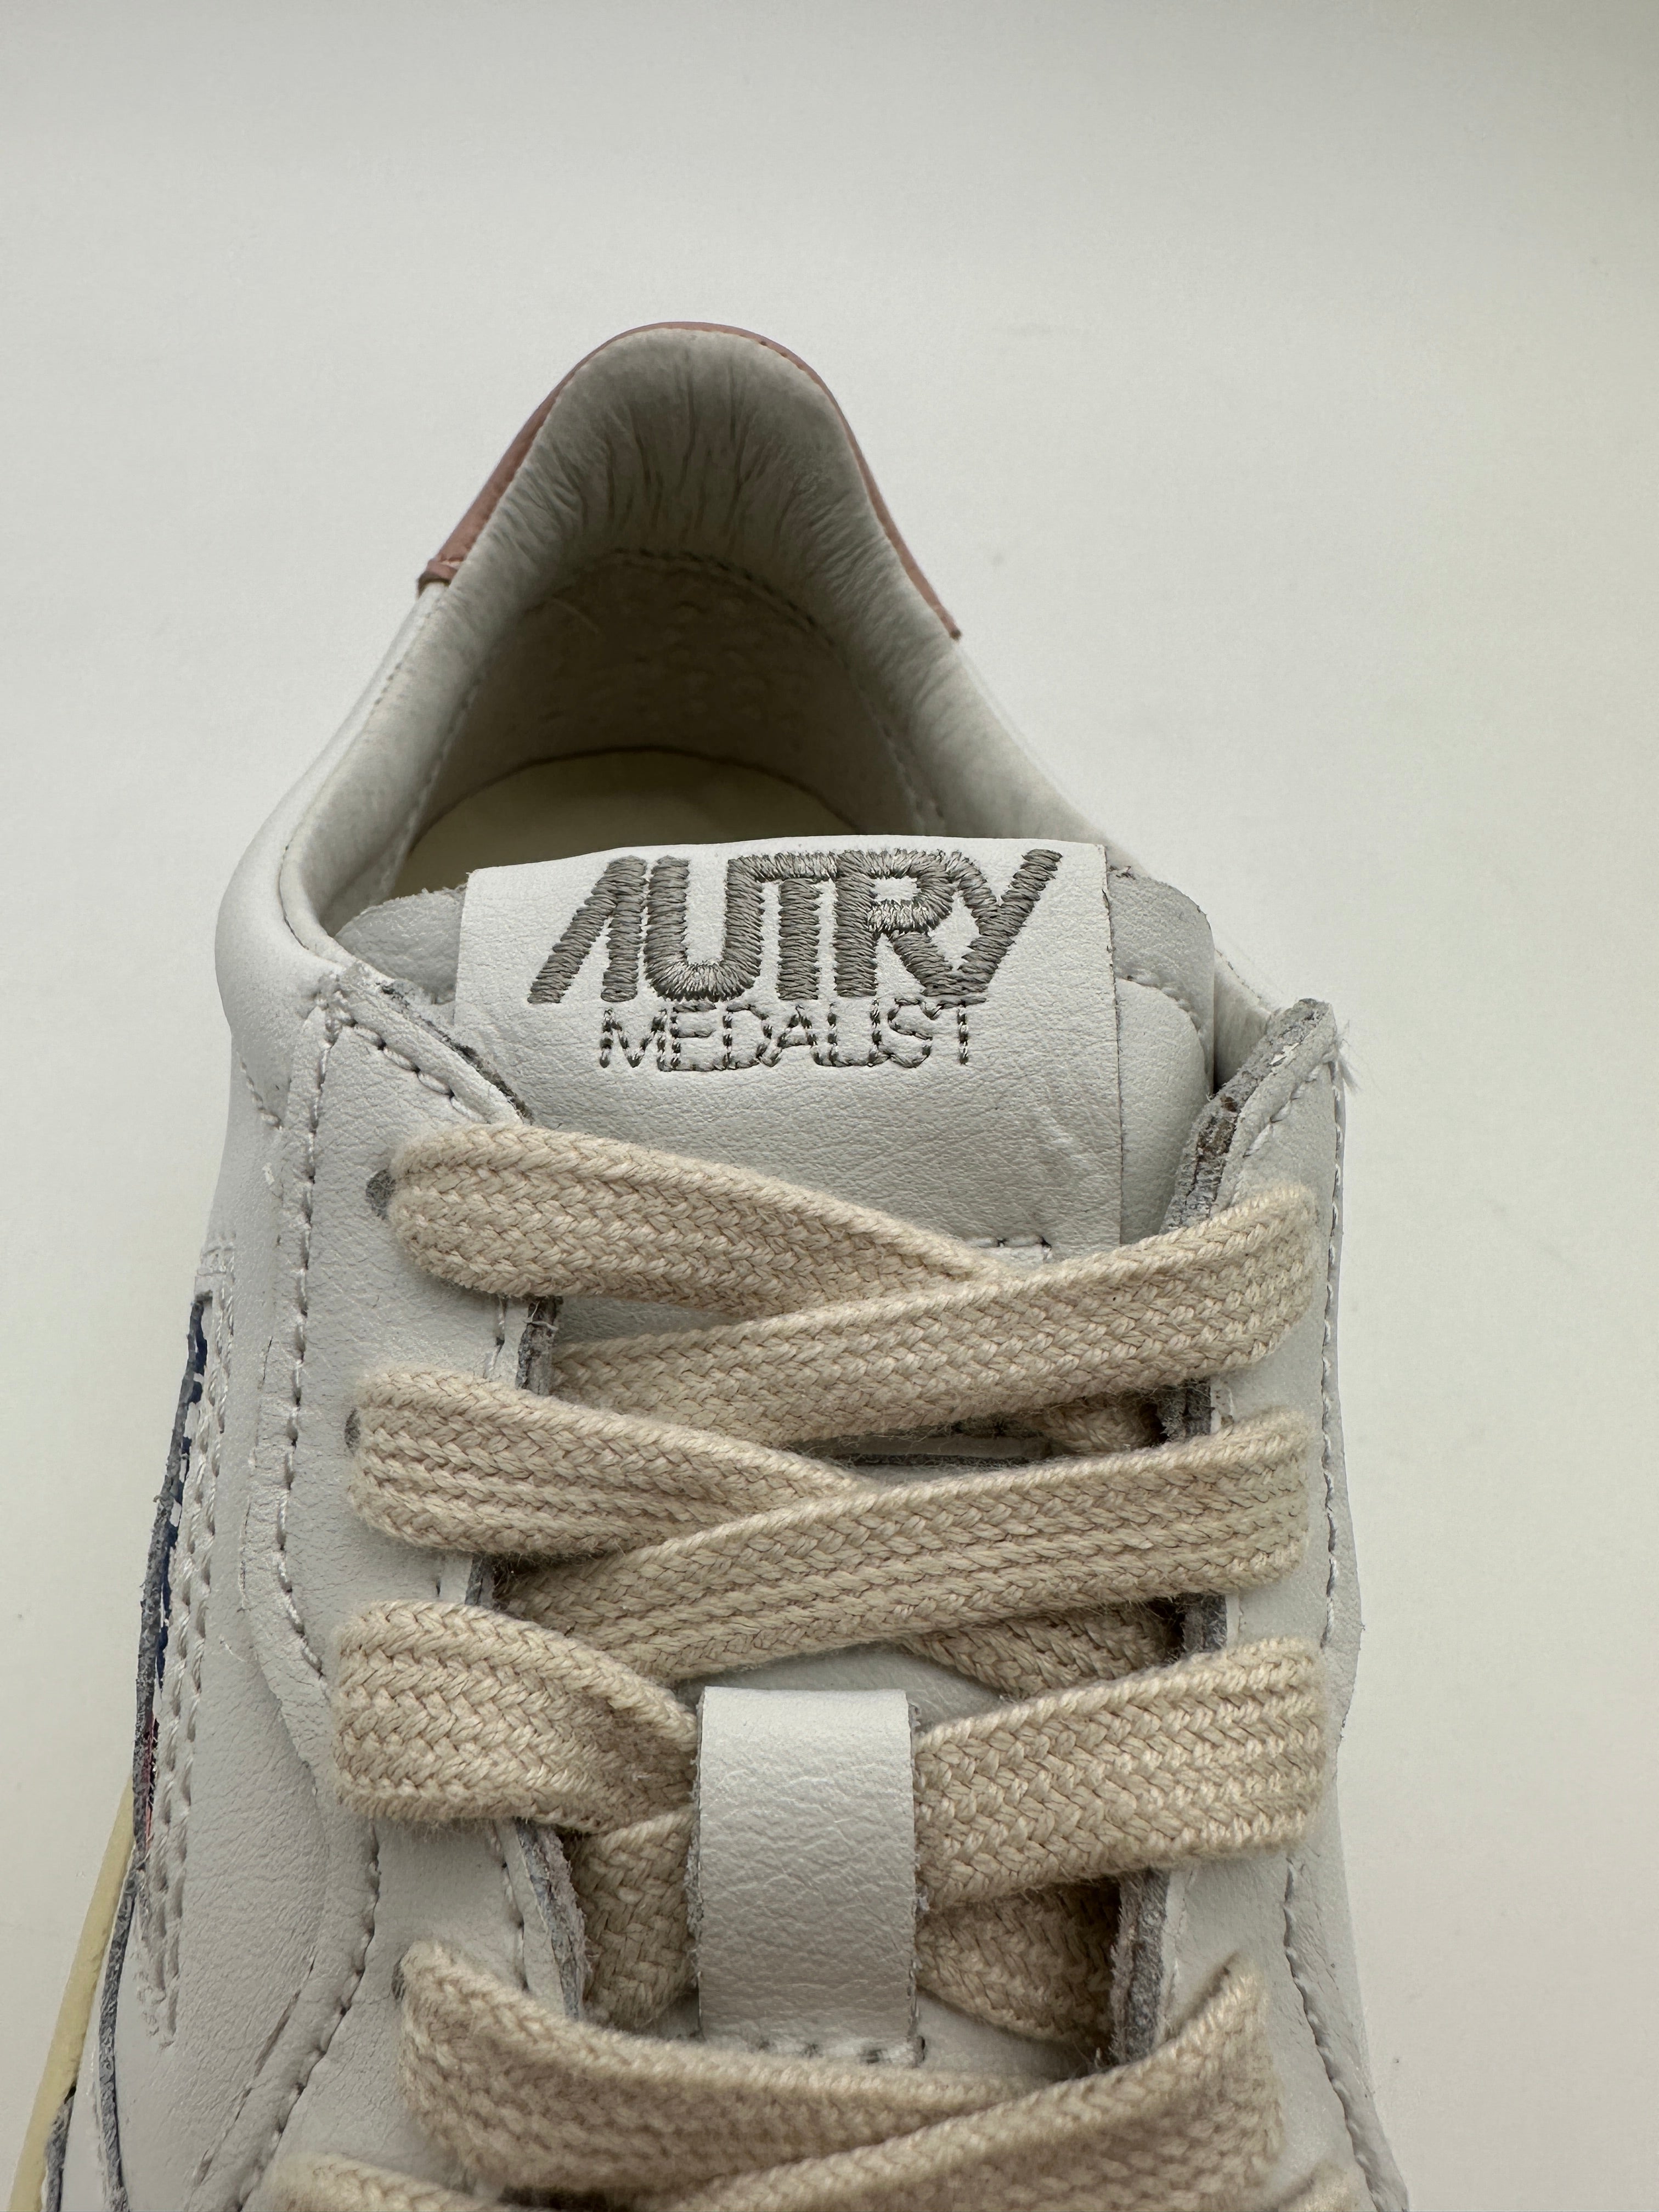 Autry 01 low Sneakers